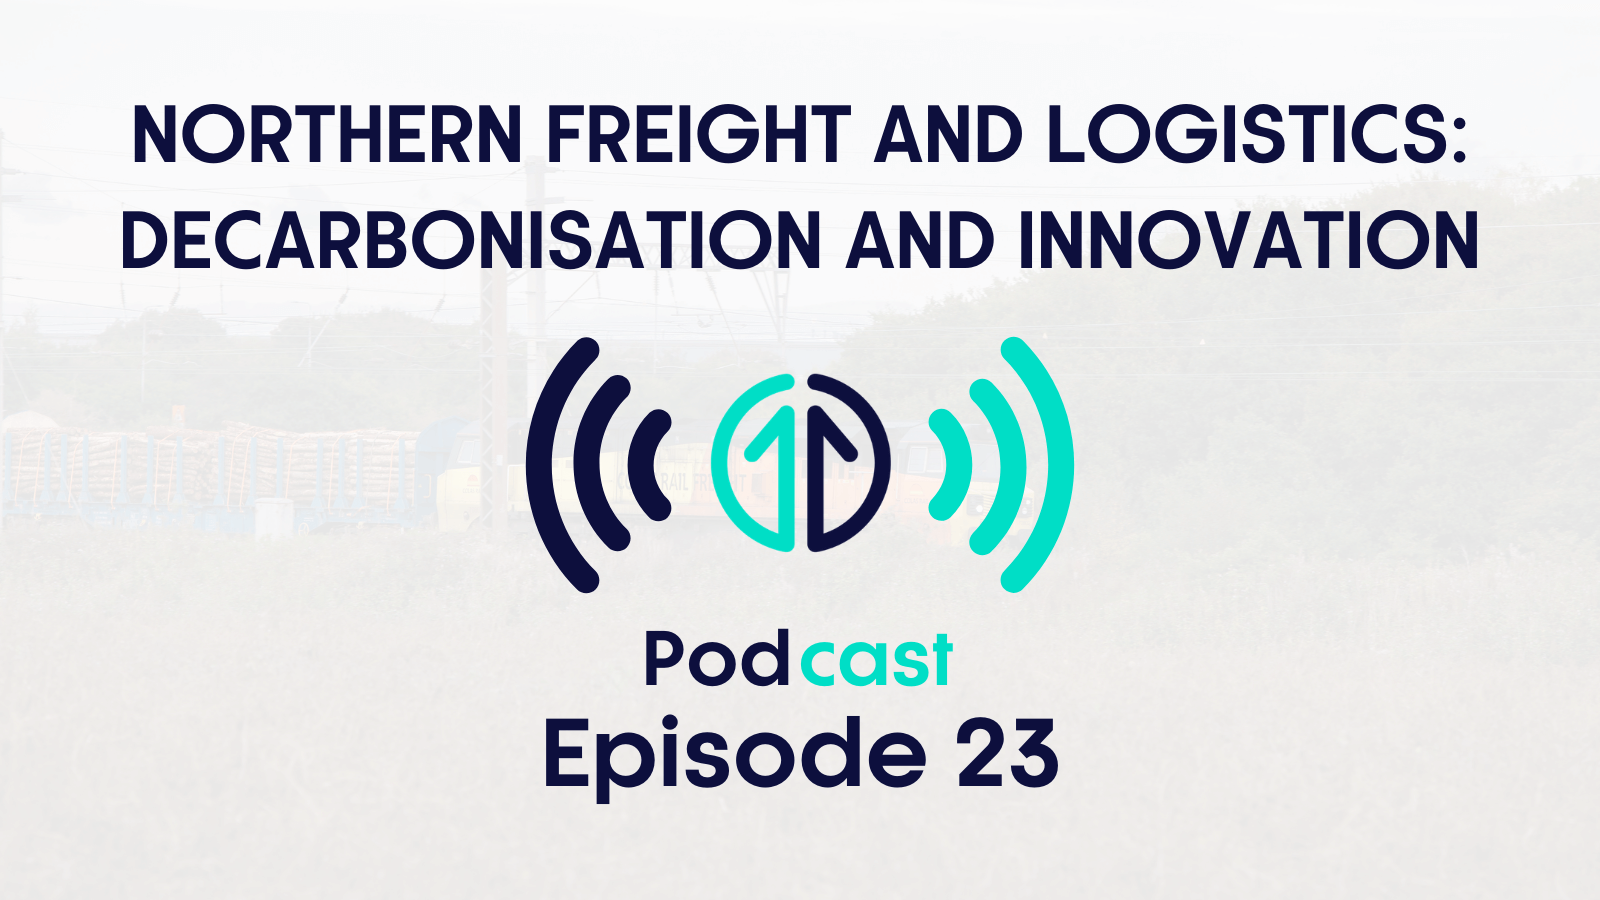 Northern Freight and Logistics Podcast - Episode 23